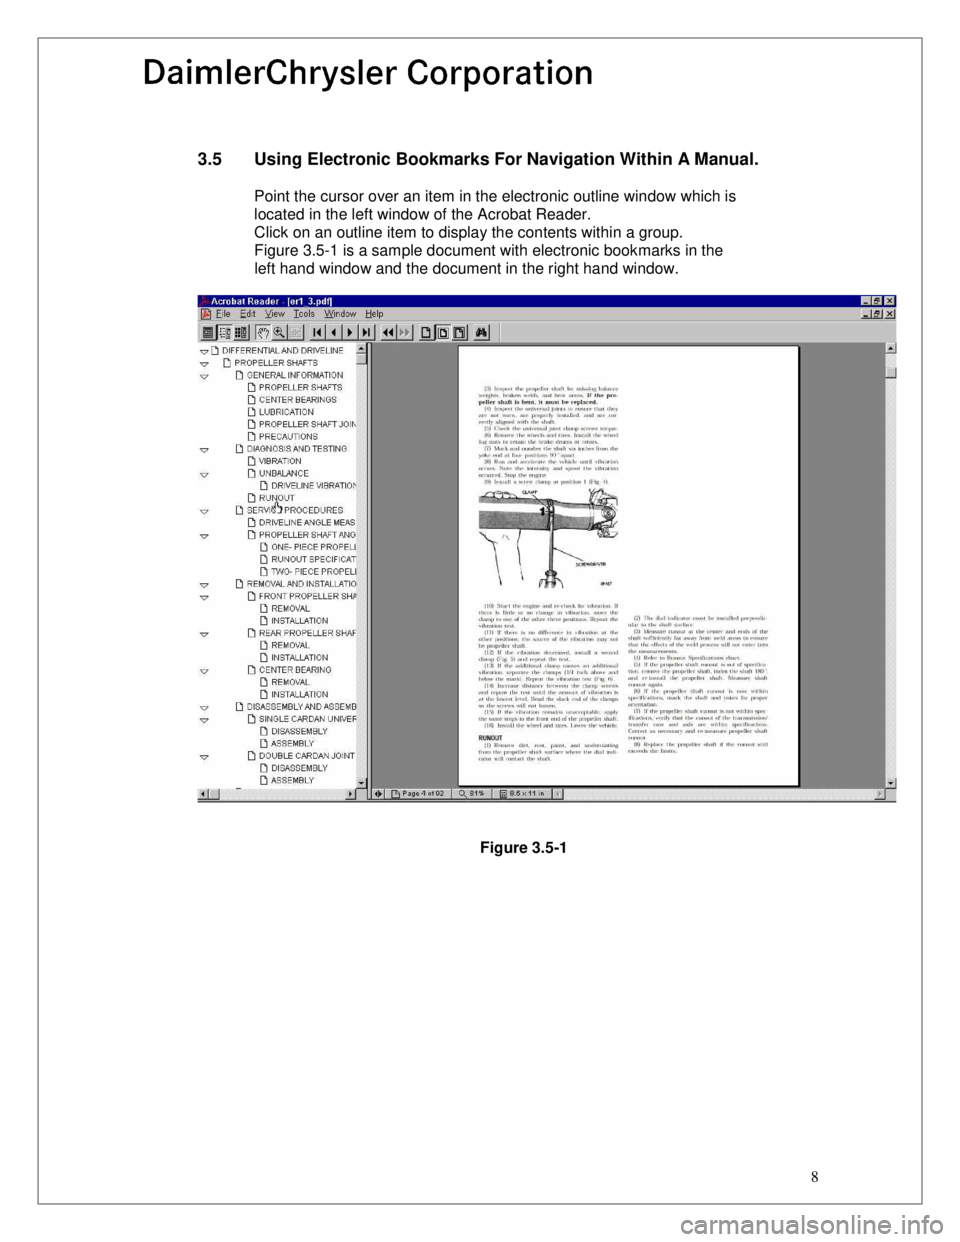 JEEP CHEROKEE 1994  Service Repair Manual 8
3.5  Using Electronic Bookmarks For Navigation Within A Manual.
       Point the cursor over an item in the electronic outline window which is
located in the left window of the Acrobat Reader.
     